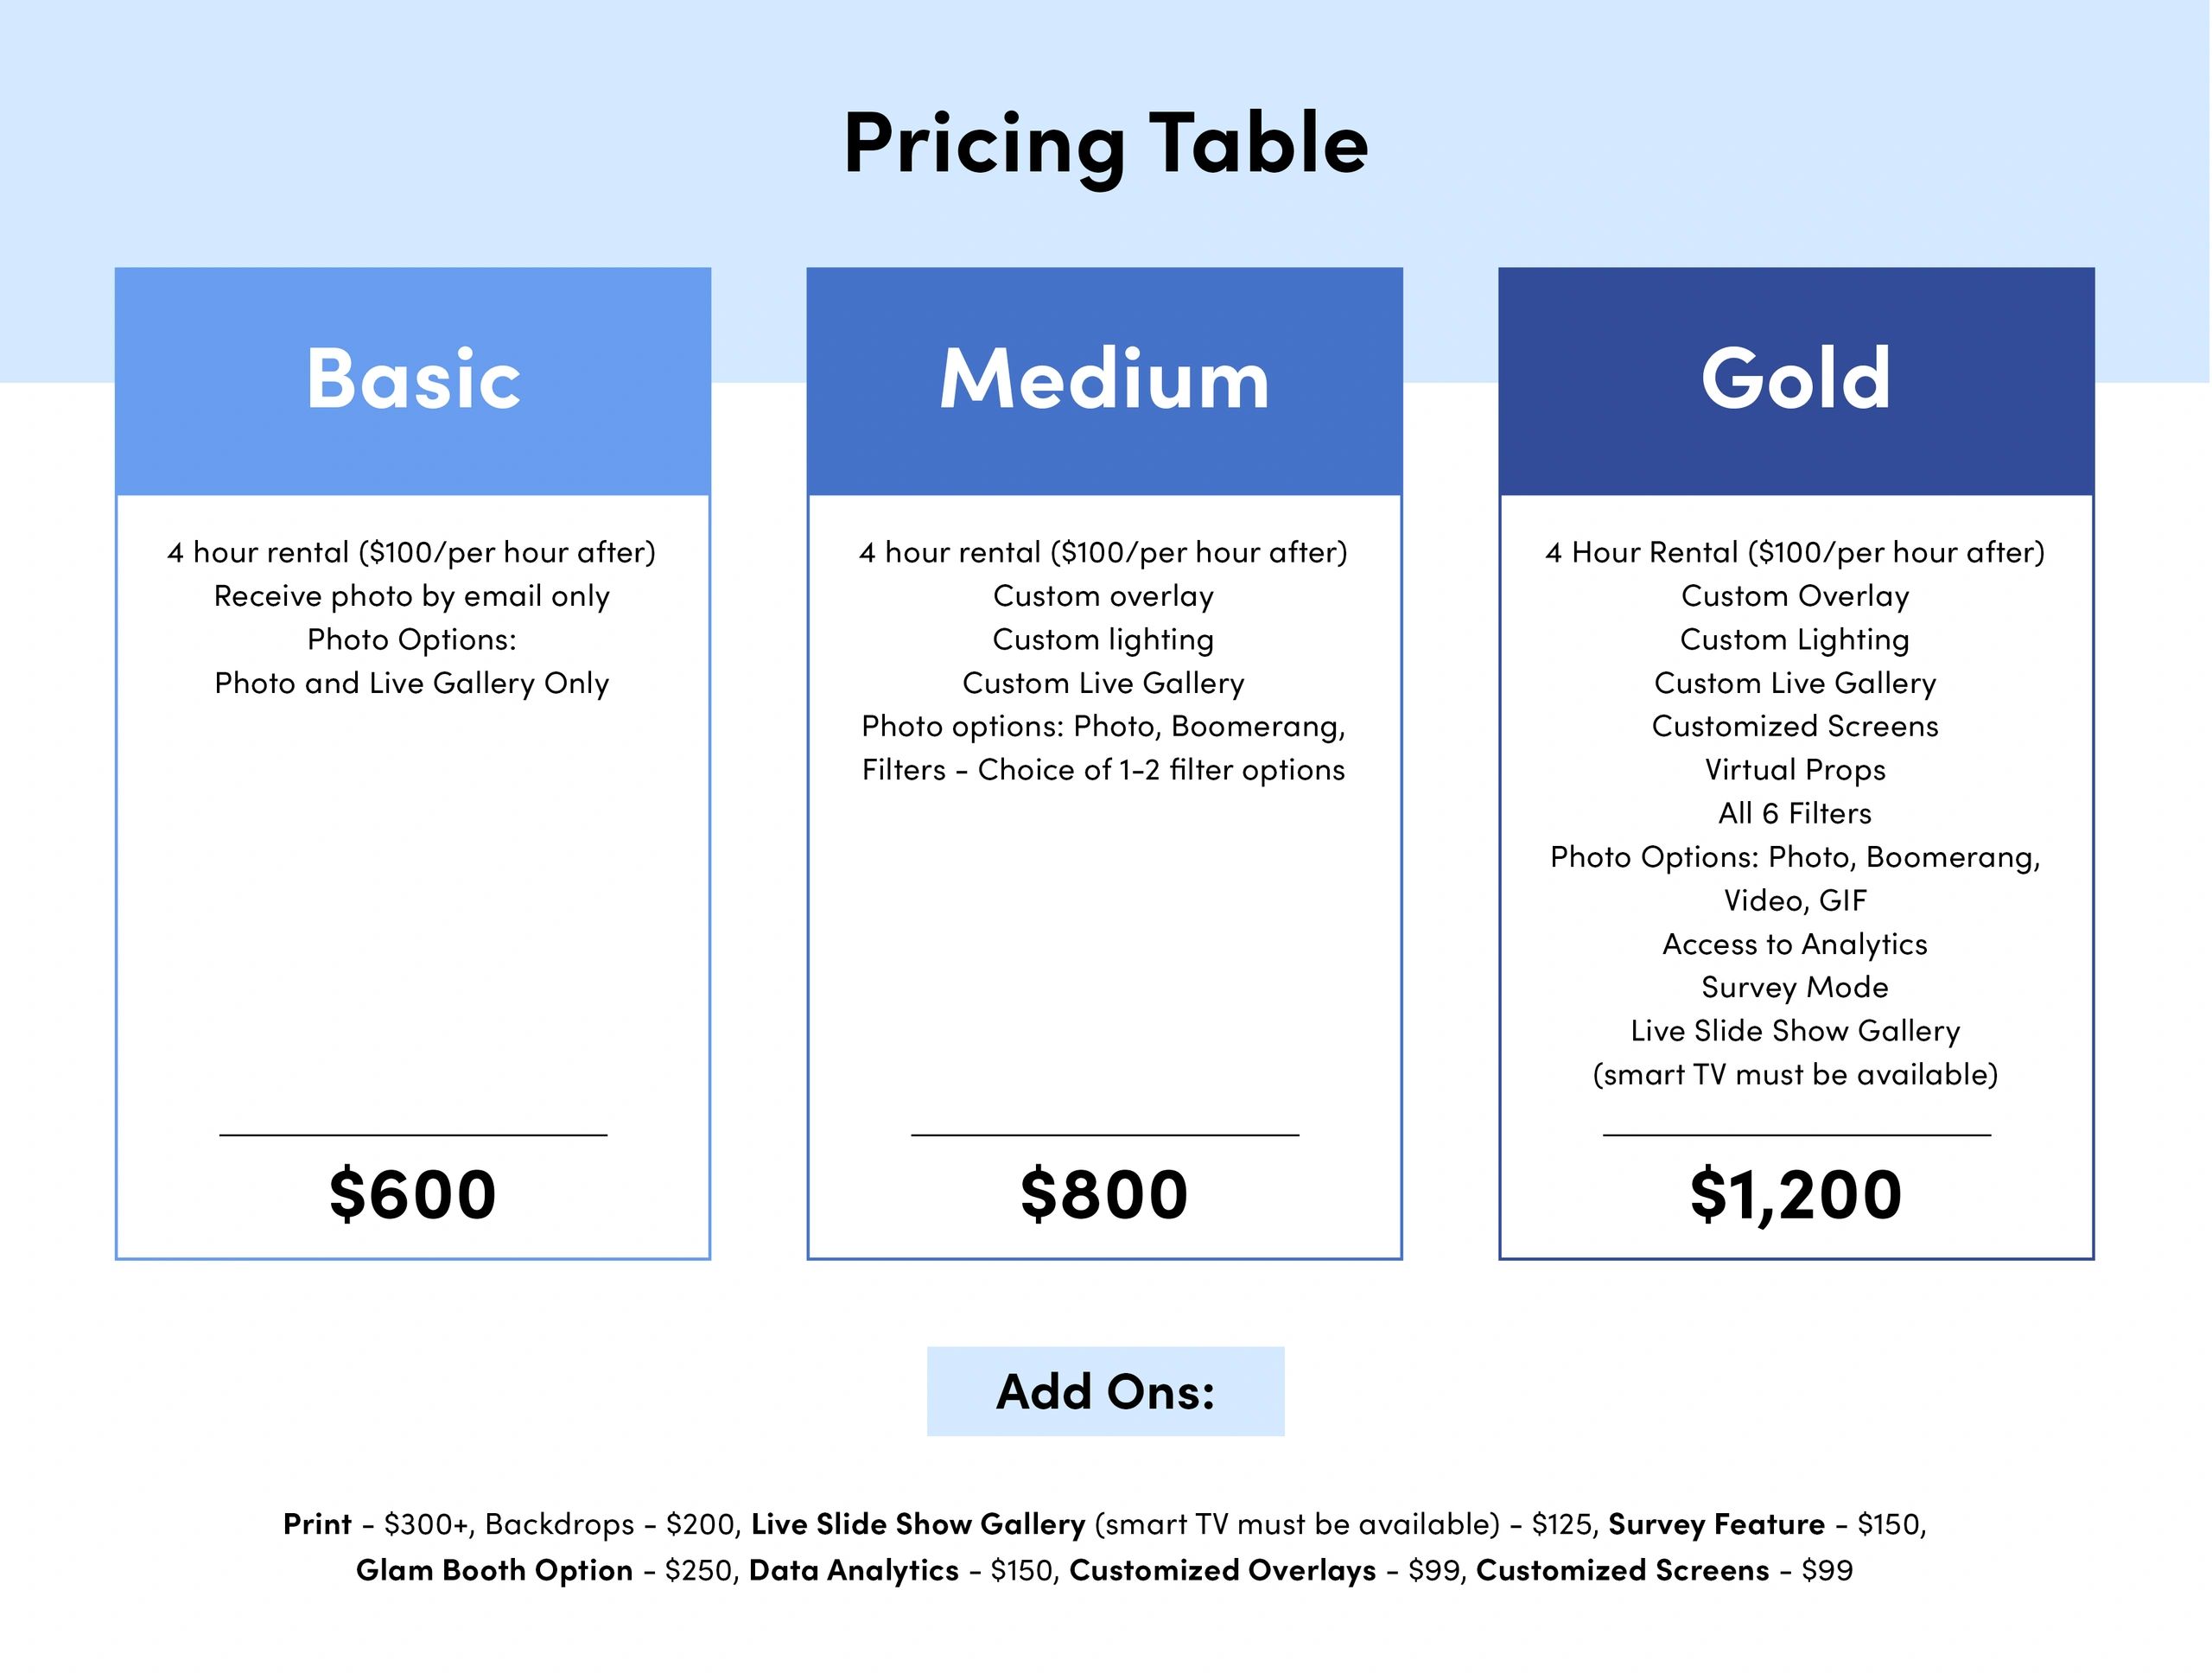 Pricing Table
Photo Booth Video Booth Rental 
Packages
starting at $600
Greater Philadelphia region
